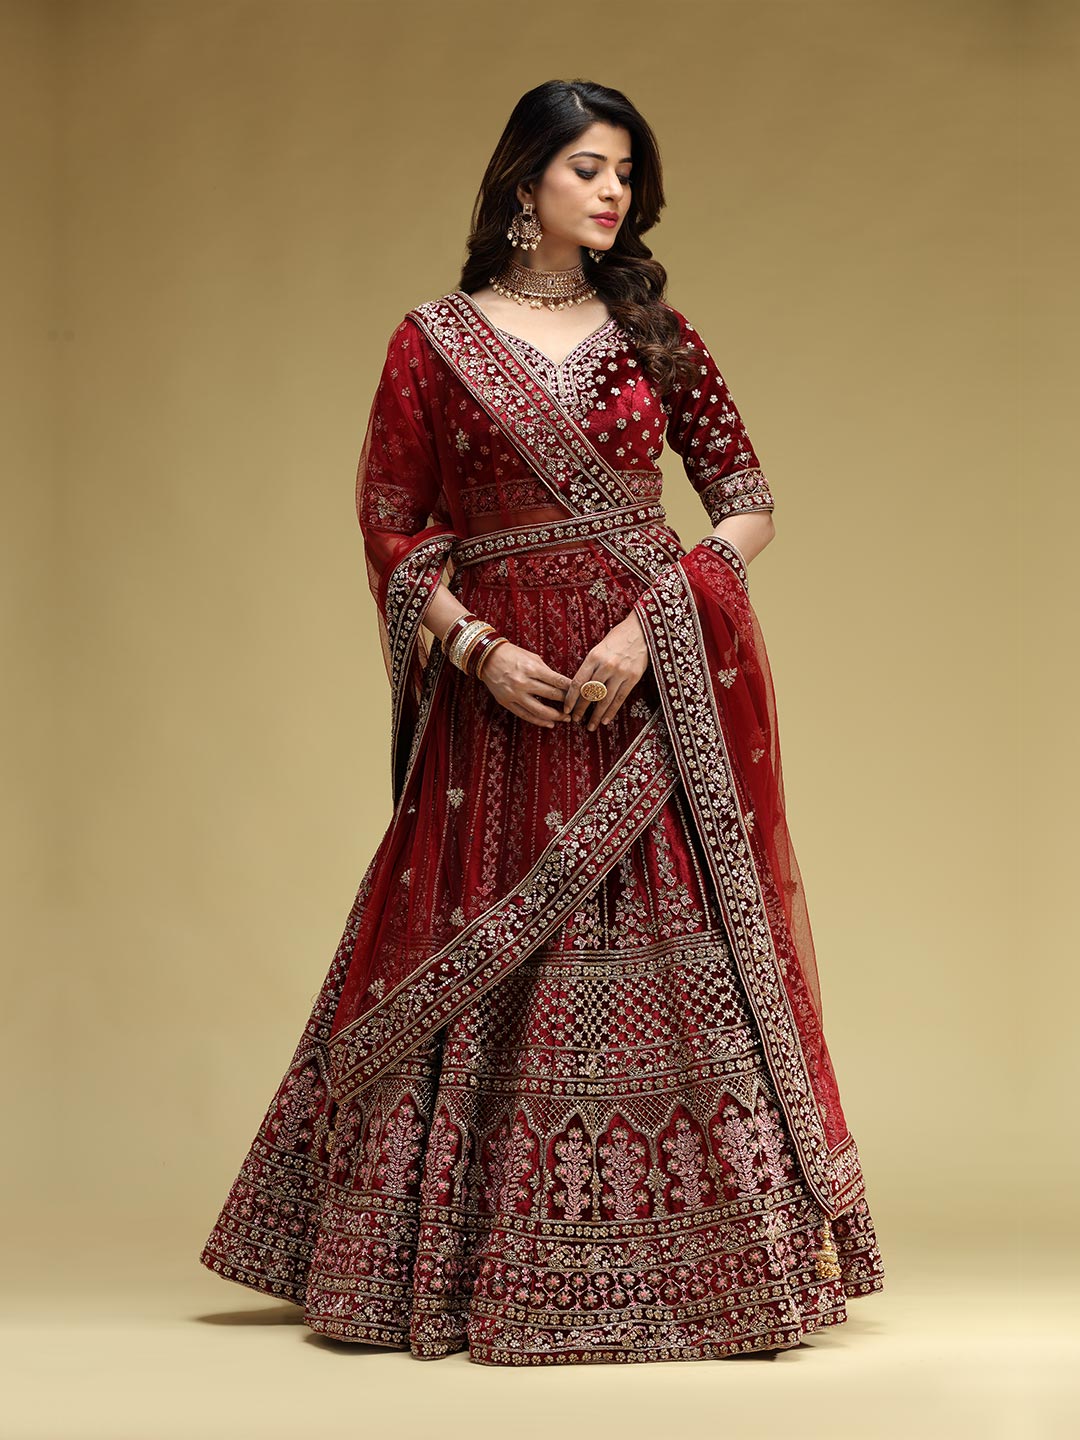 Stunning Red Lehenga Designs That We Loved On Real Brides